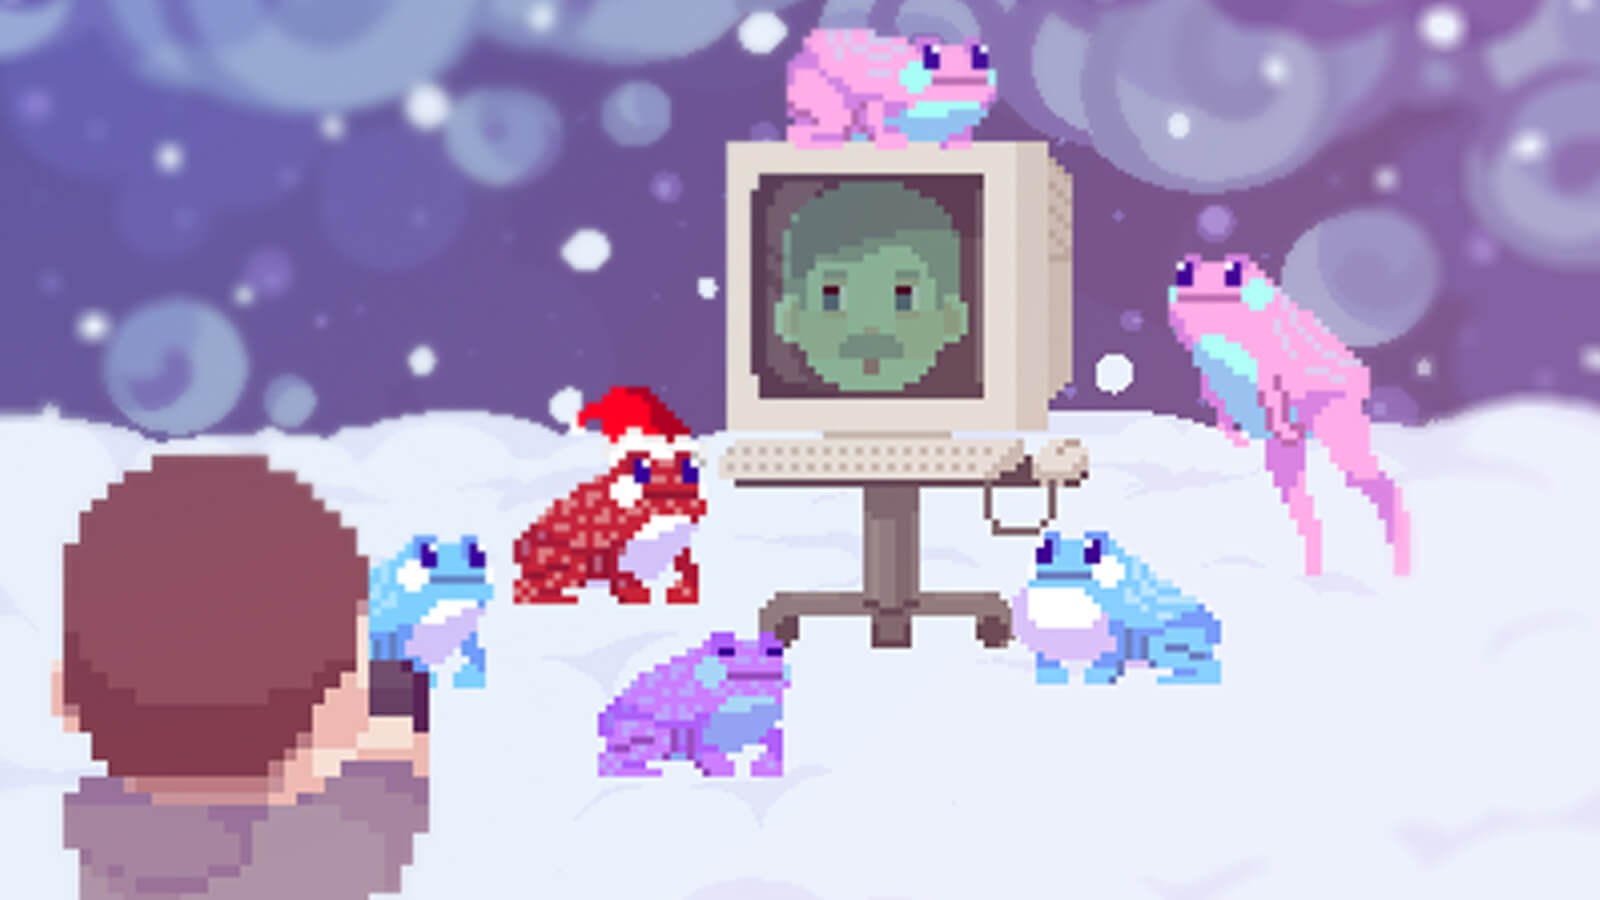 A man shoots a picture of frogs gathered around a computer with a mustached man's face on it in the snow.